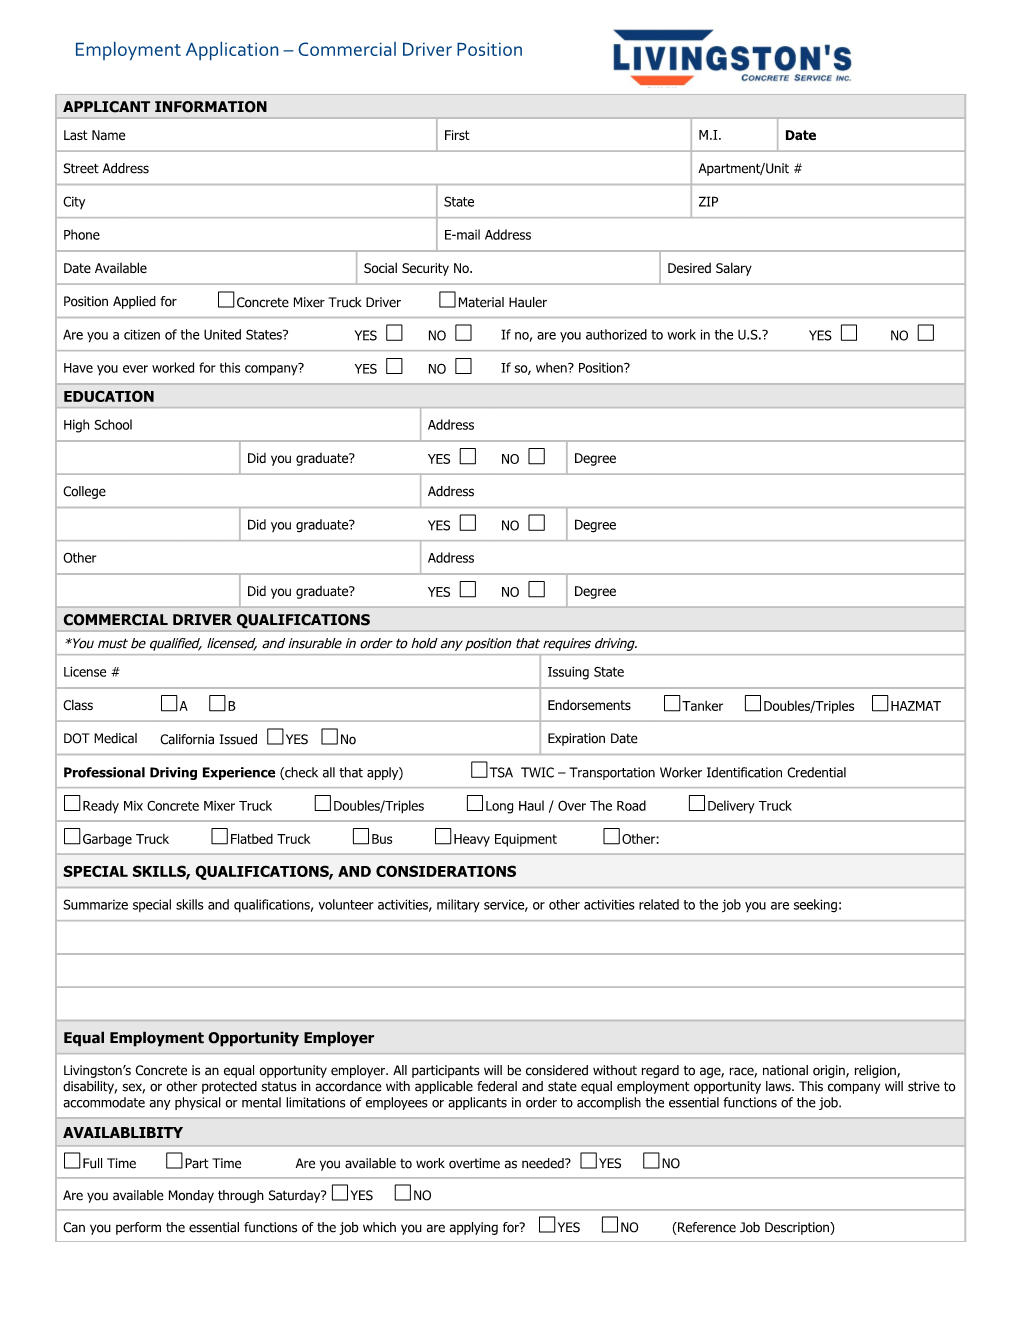 Employment Application Commercial Driver Position